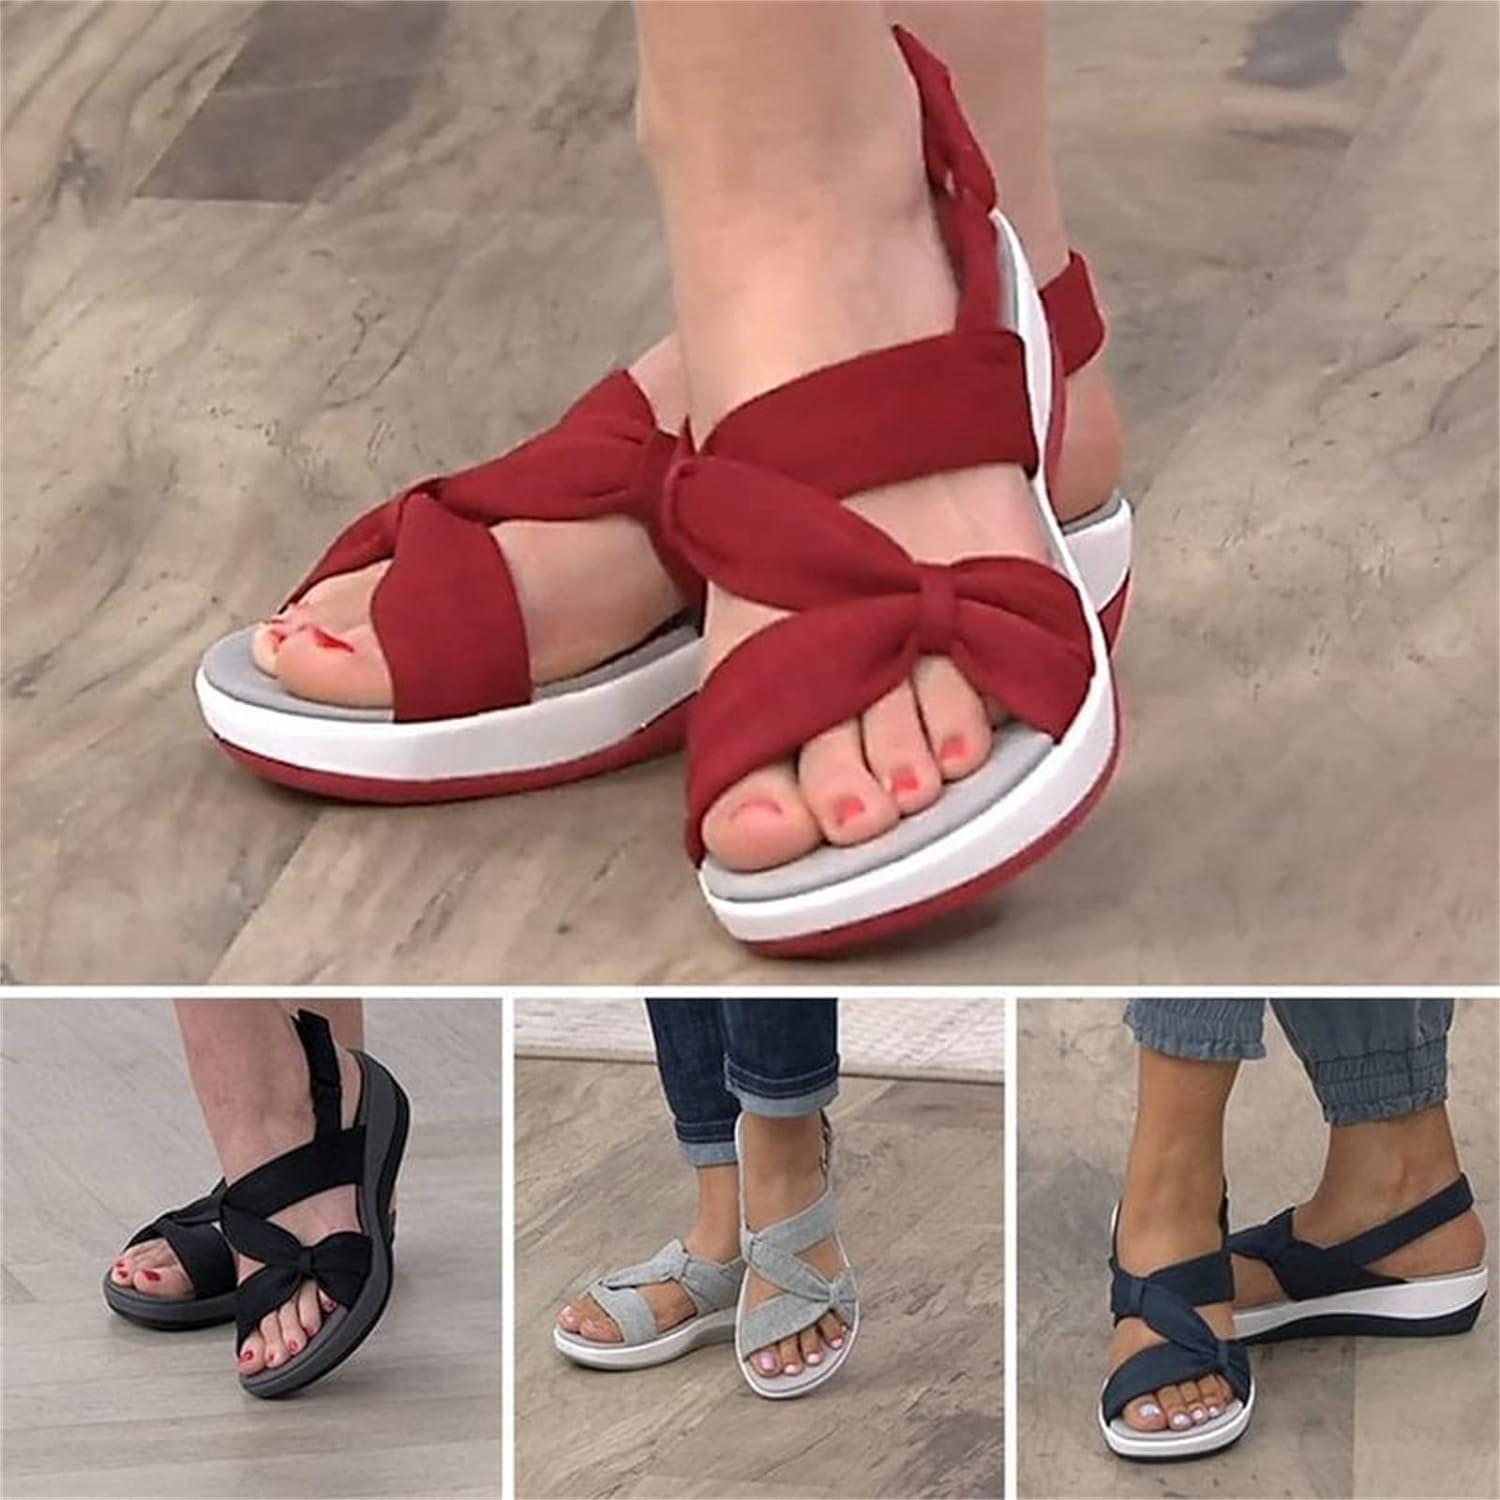 Update more than 86 orthopedic sandals with arch support super hot